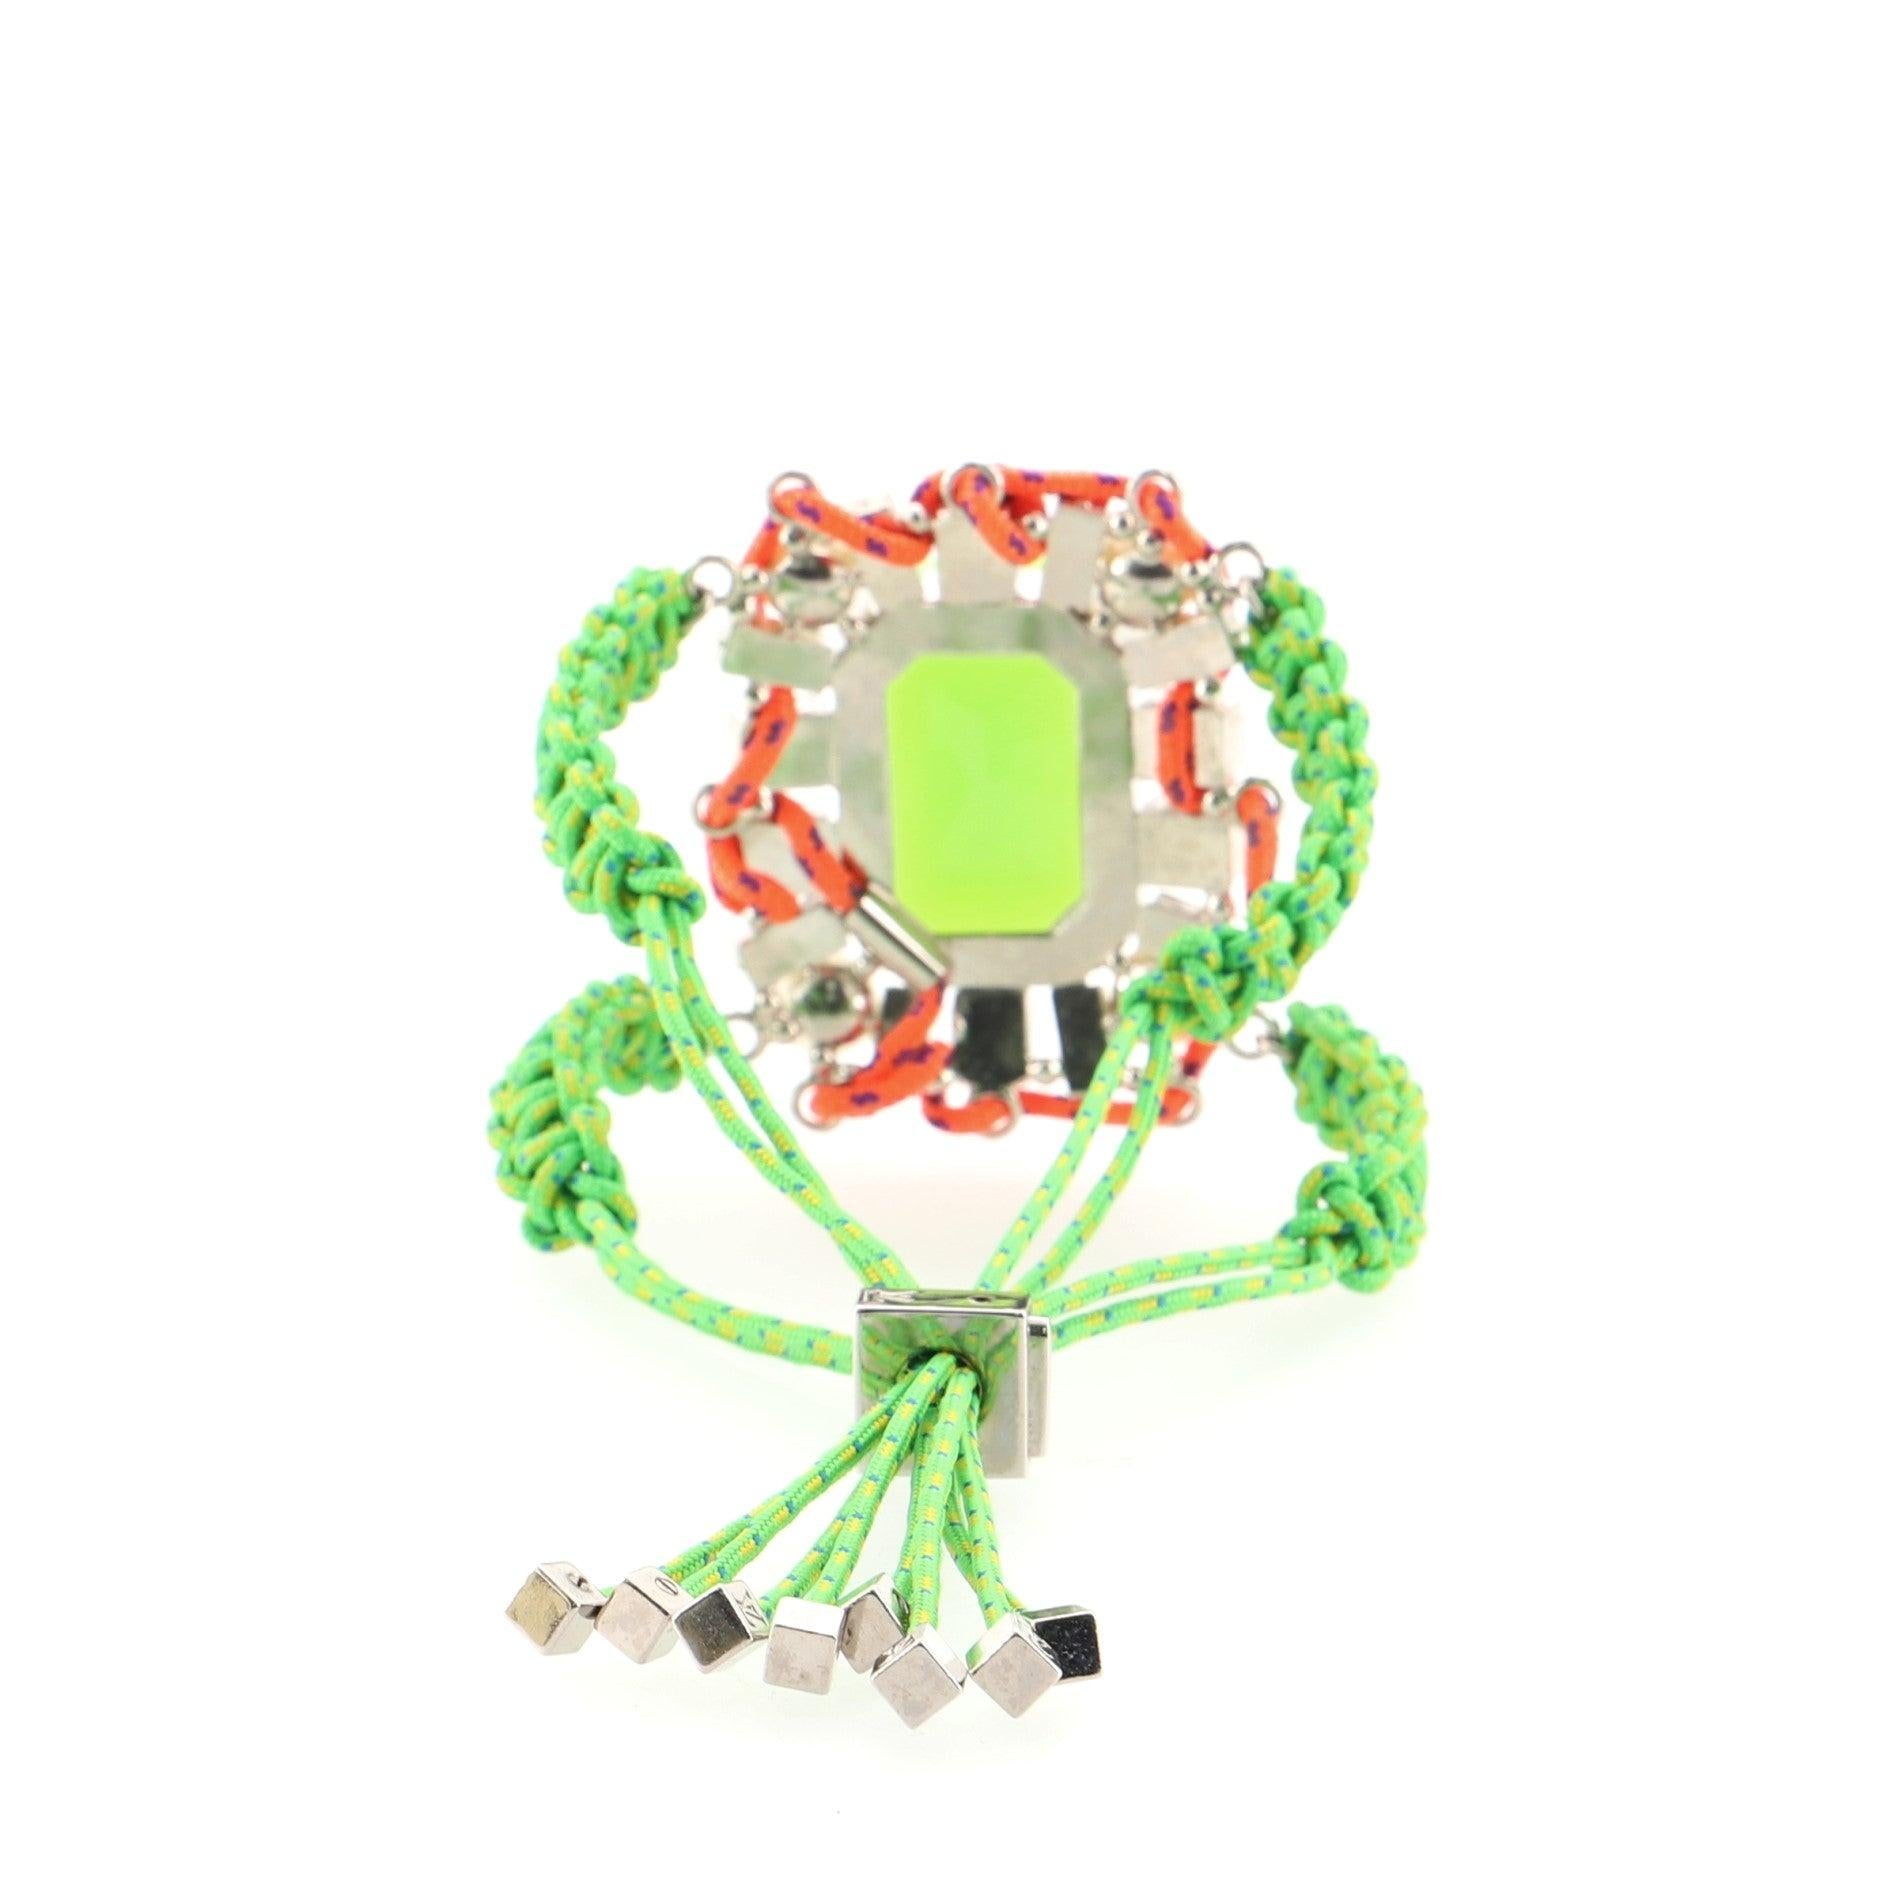 Louis Vuitton Rope Bracelet Rhinestone and Faux Pearl
Green Rhinestone

Condition Details: Scratches and wear throughout.

50427MSC

Height 